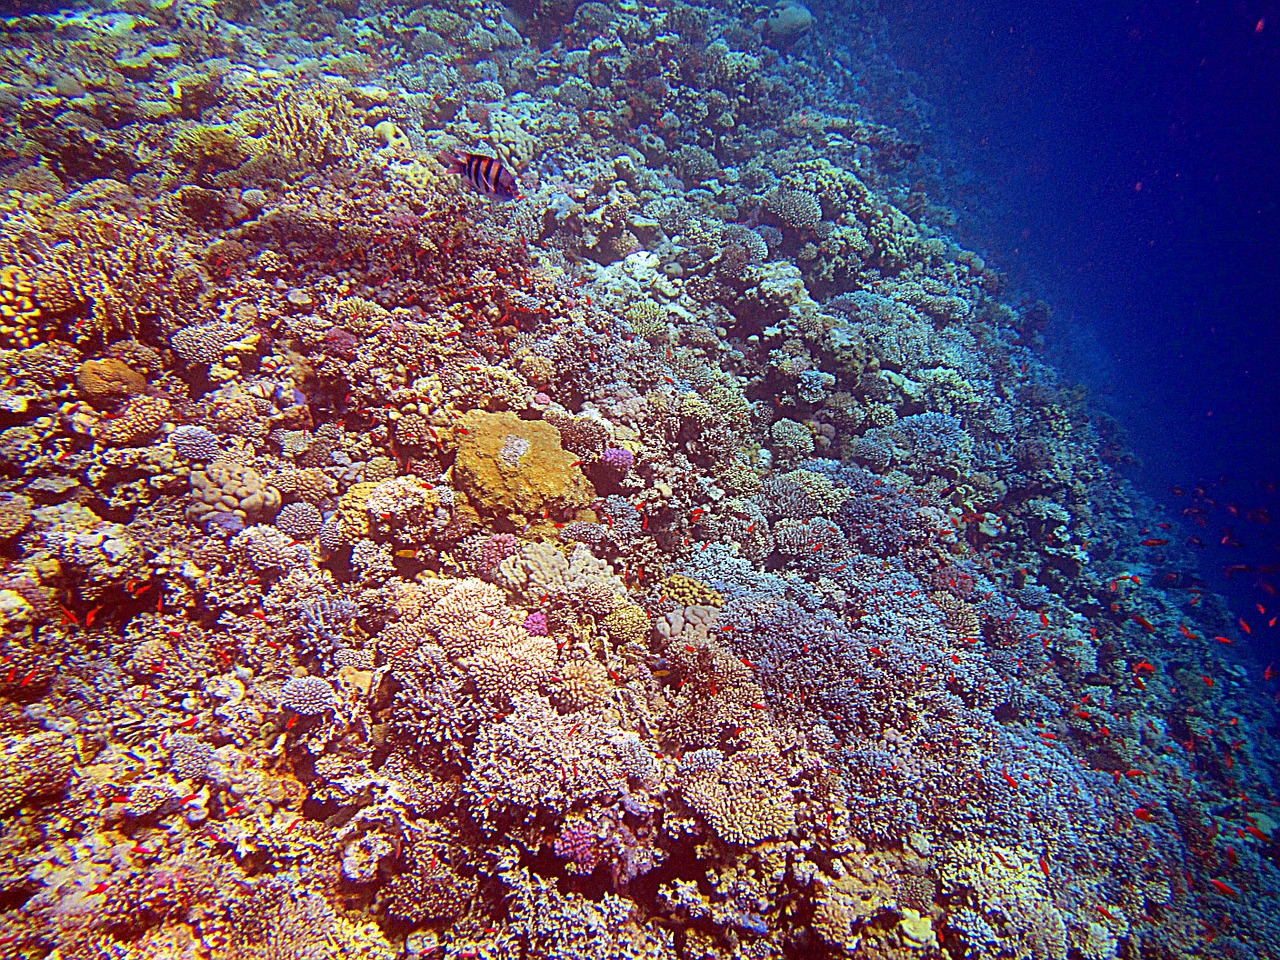 Download free photo of Coral,red sea,egypt,coral reef,colorful - from ...